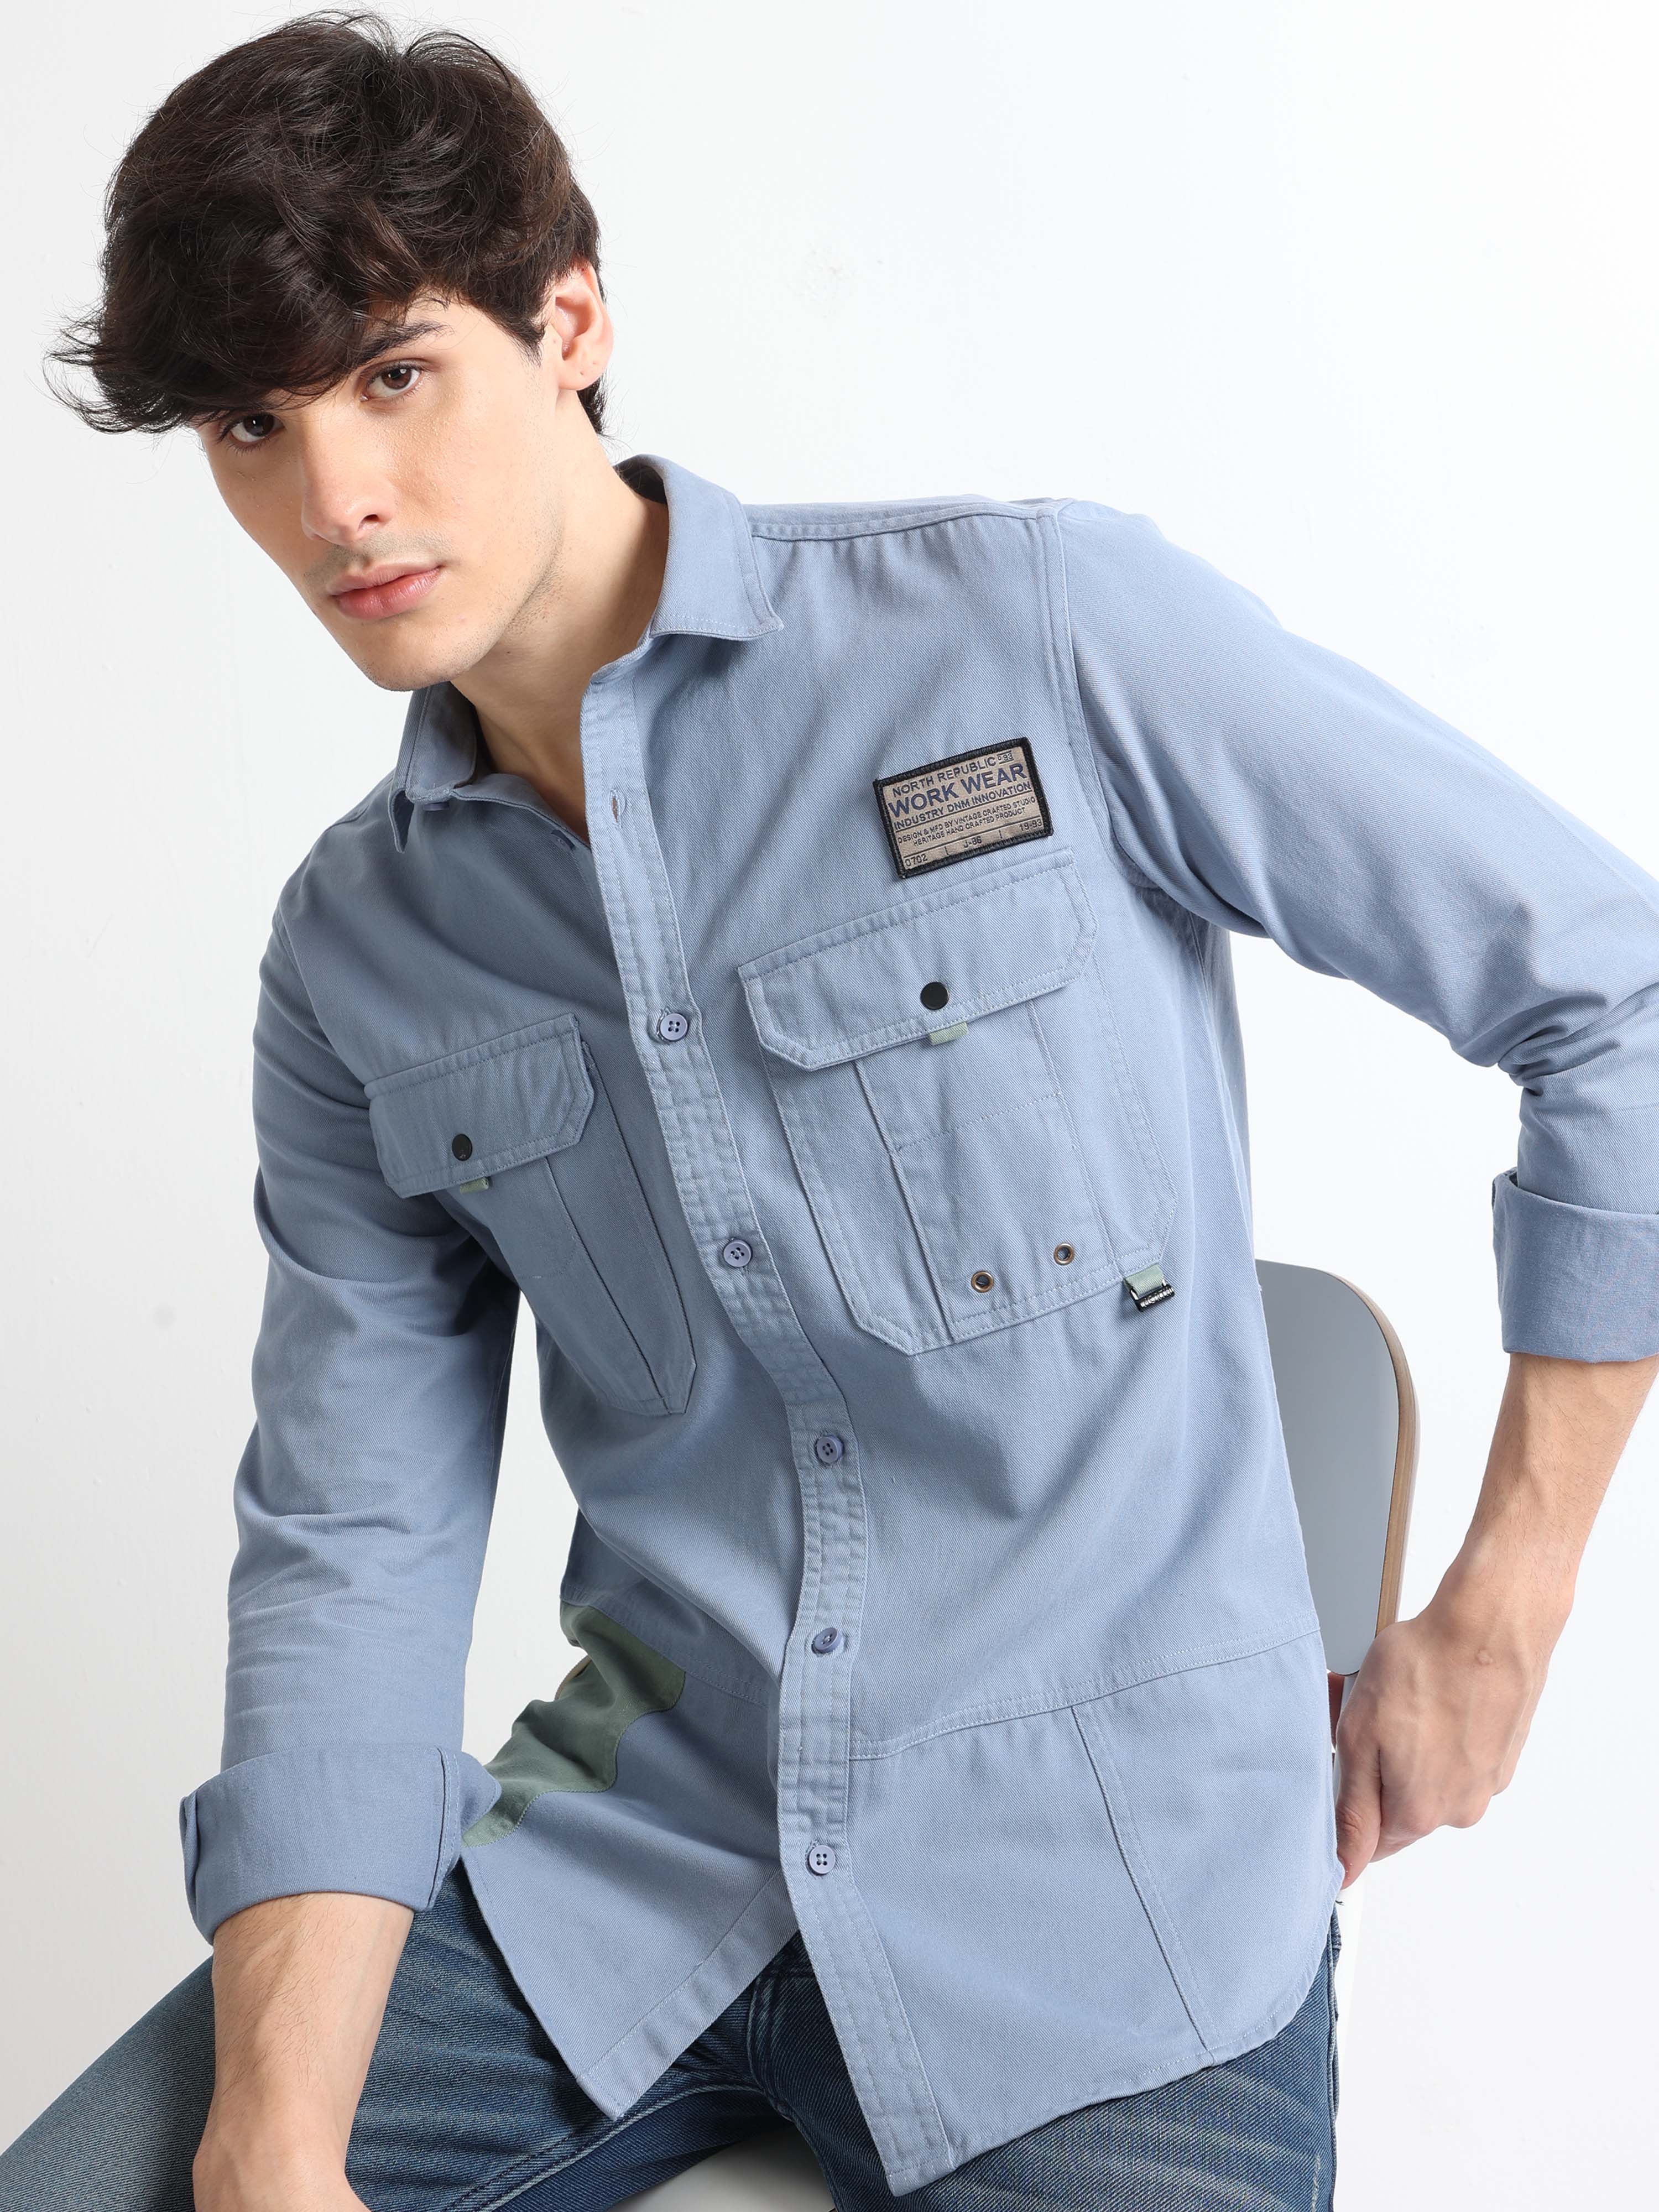 Elevate Your Style with Timeless Fashion | North Republic | Casual shirts  for men, Boys formal shirts, Jean shirt men